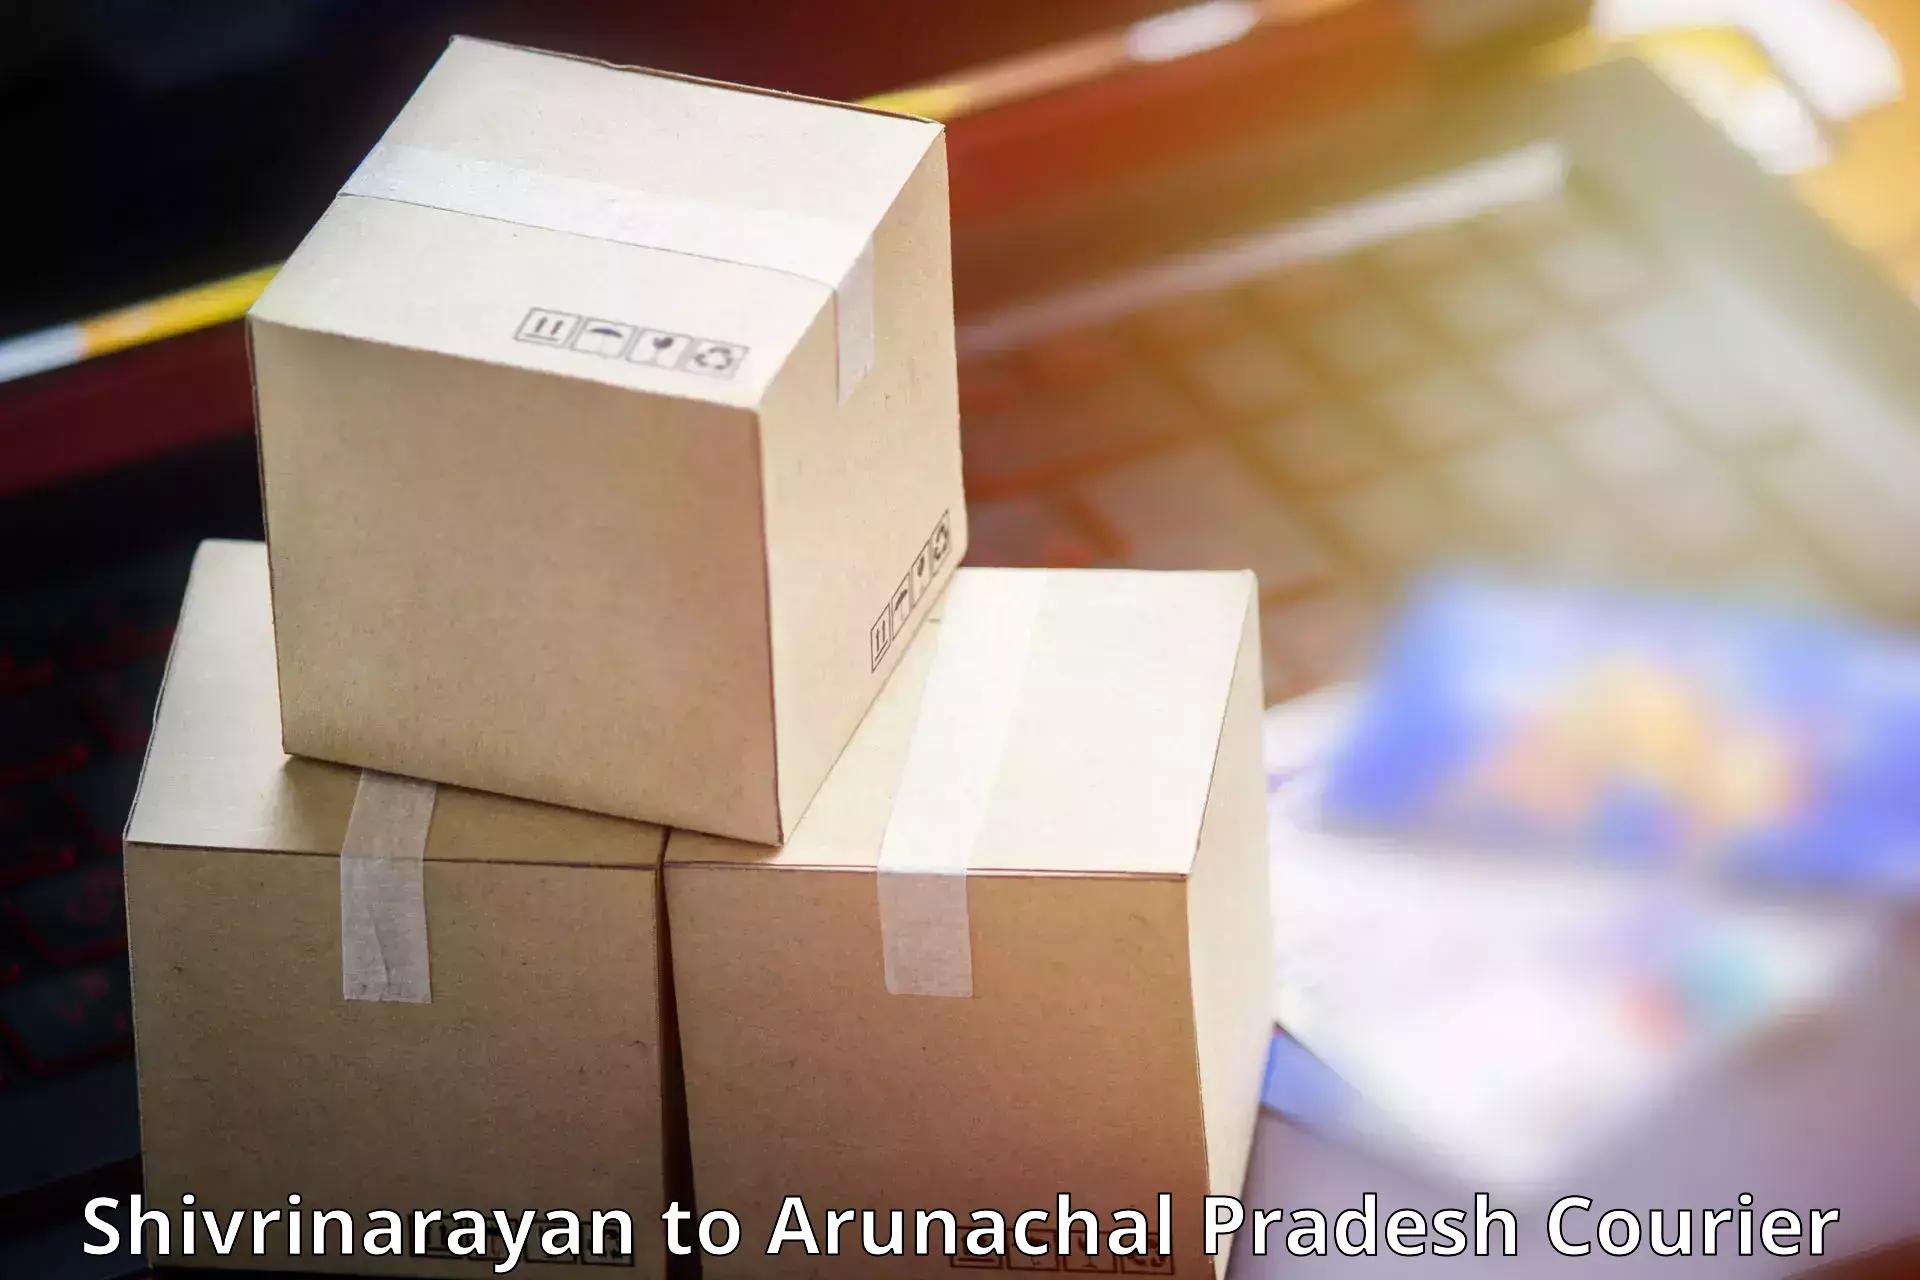 Nationwide parcel services Shivrinarayan to Aalo